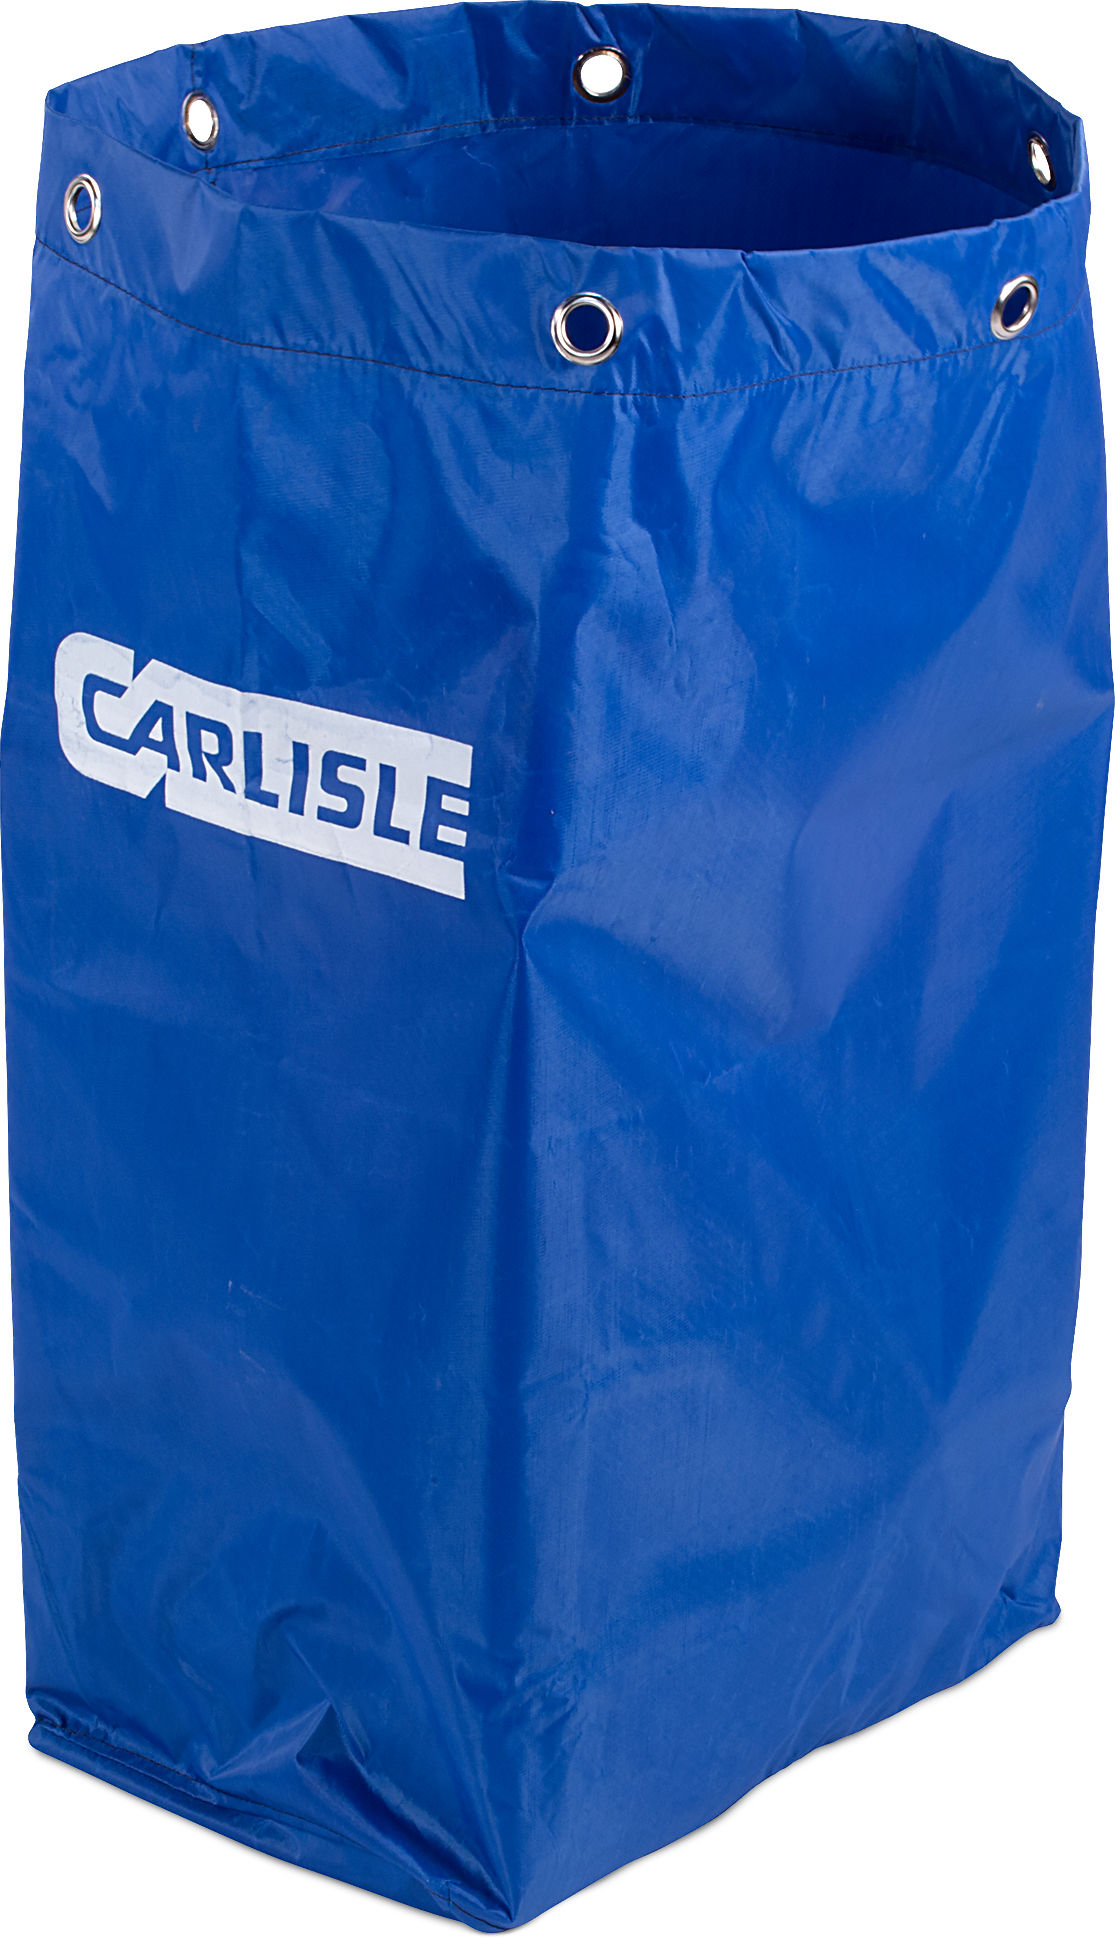 REPLACEMENT 25-GALLON BAG FOR  JANITORIAL CART - BLUE